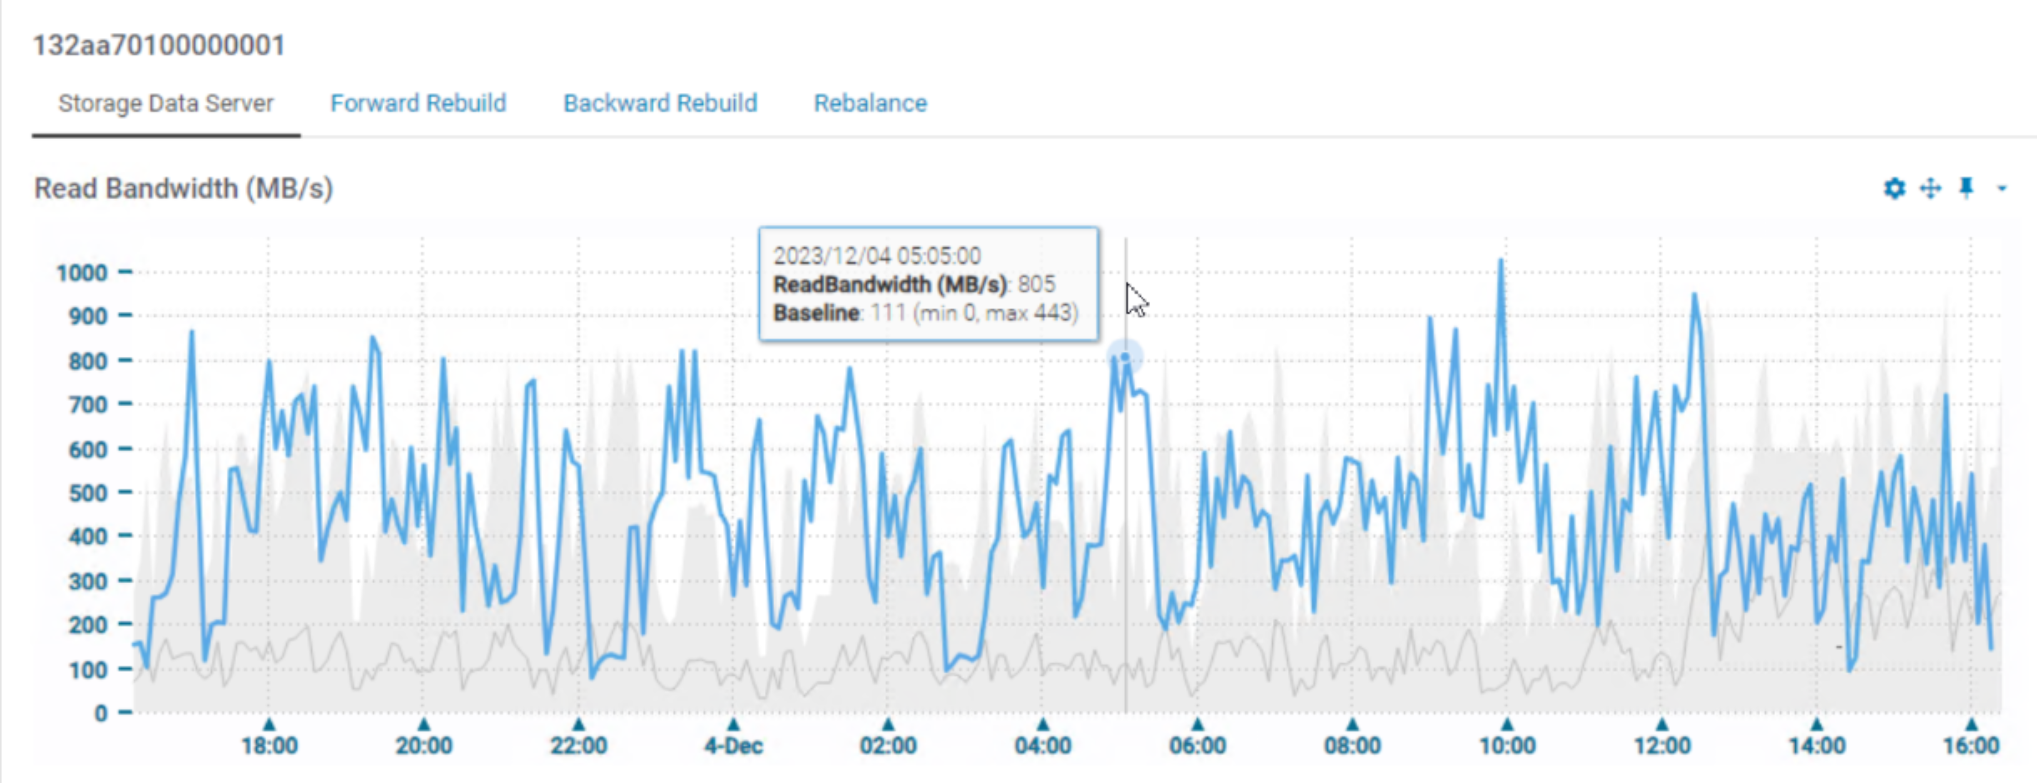 A screenshot of an SDS read bandwidth performance chart with upper and lower baselines.